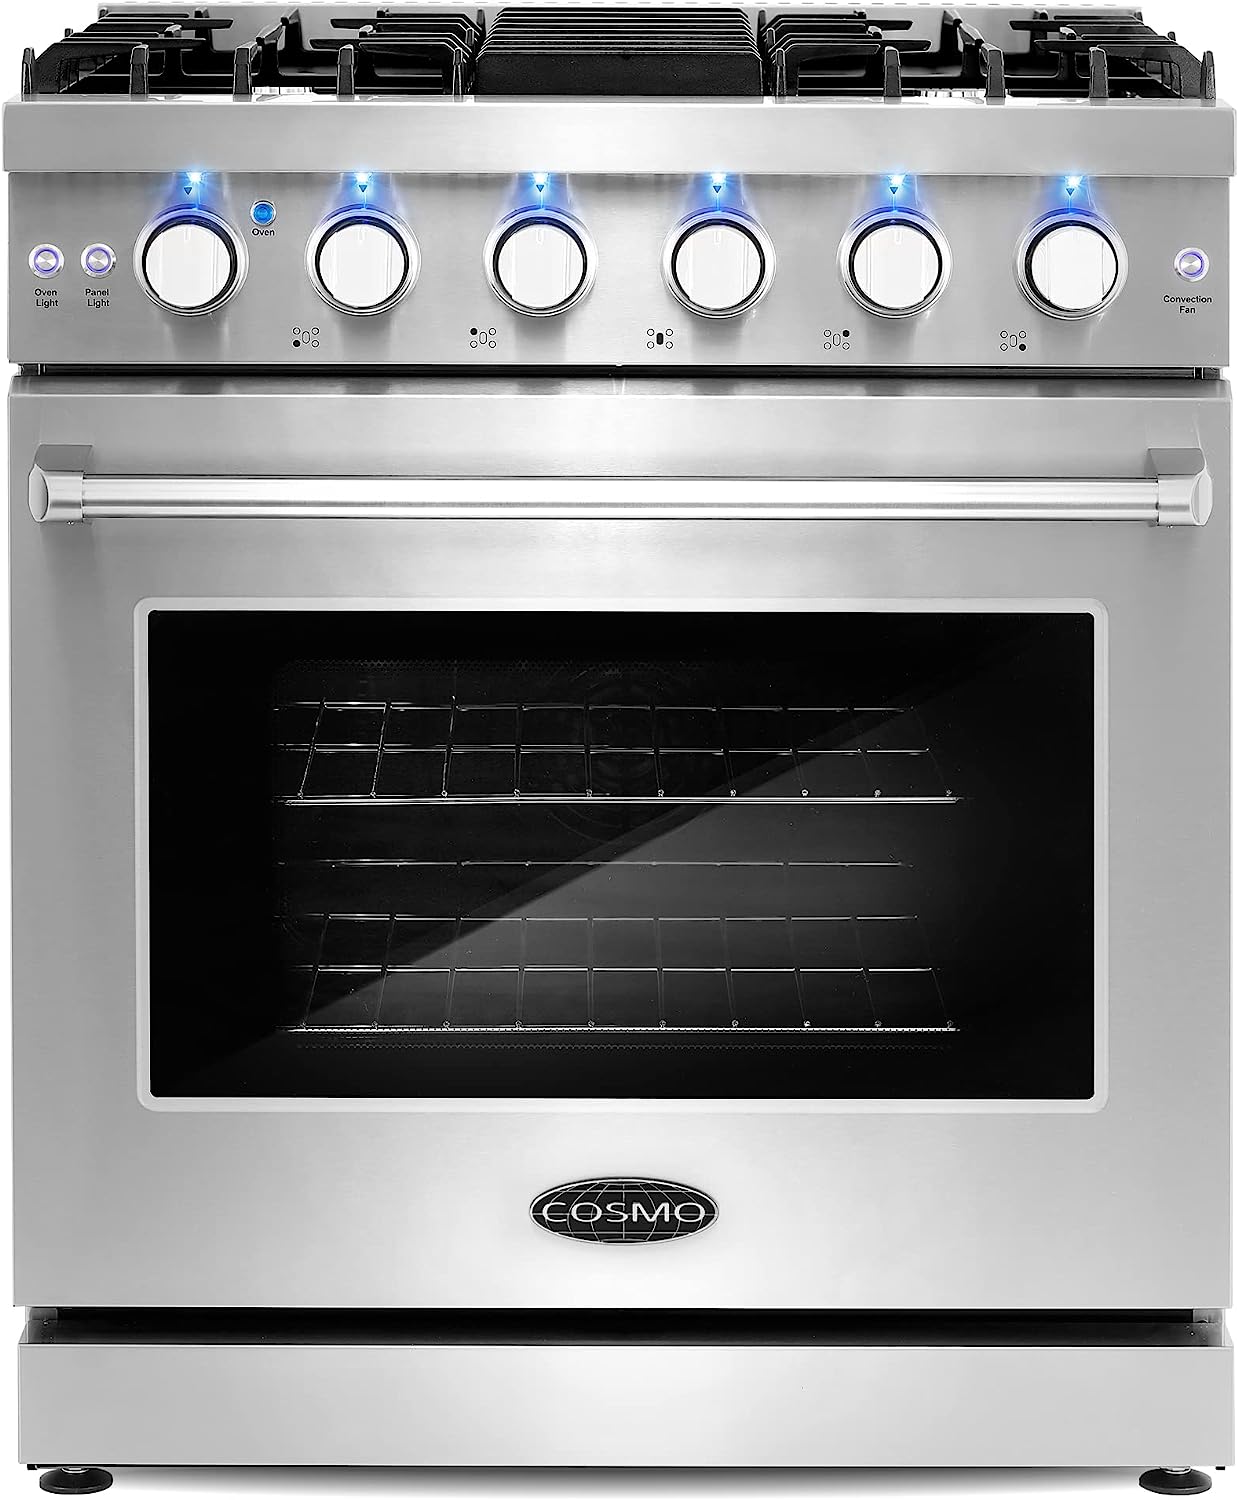 COSMO COS-EPGR304 Slide-in Freestanding Gas Range with [...]